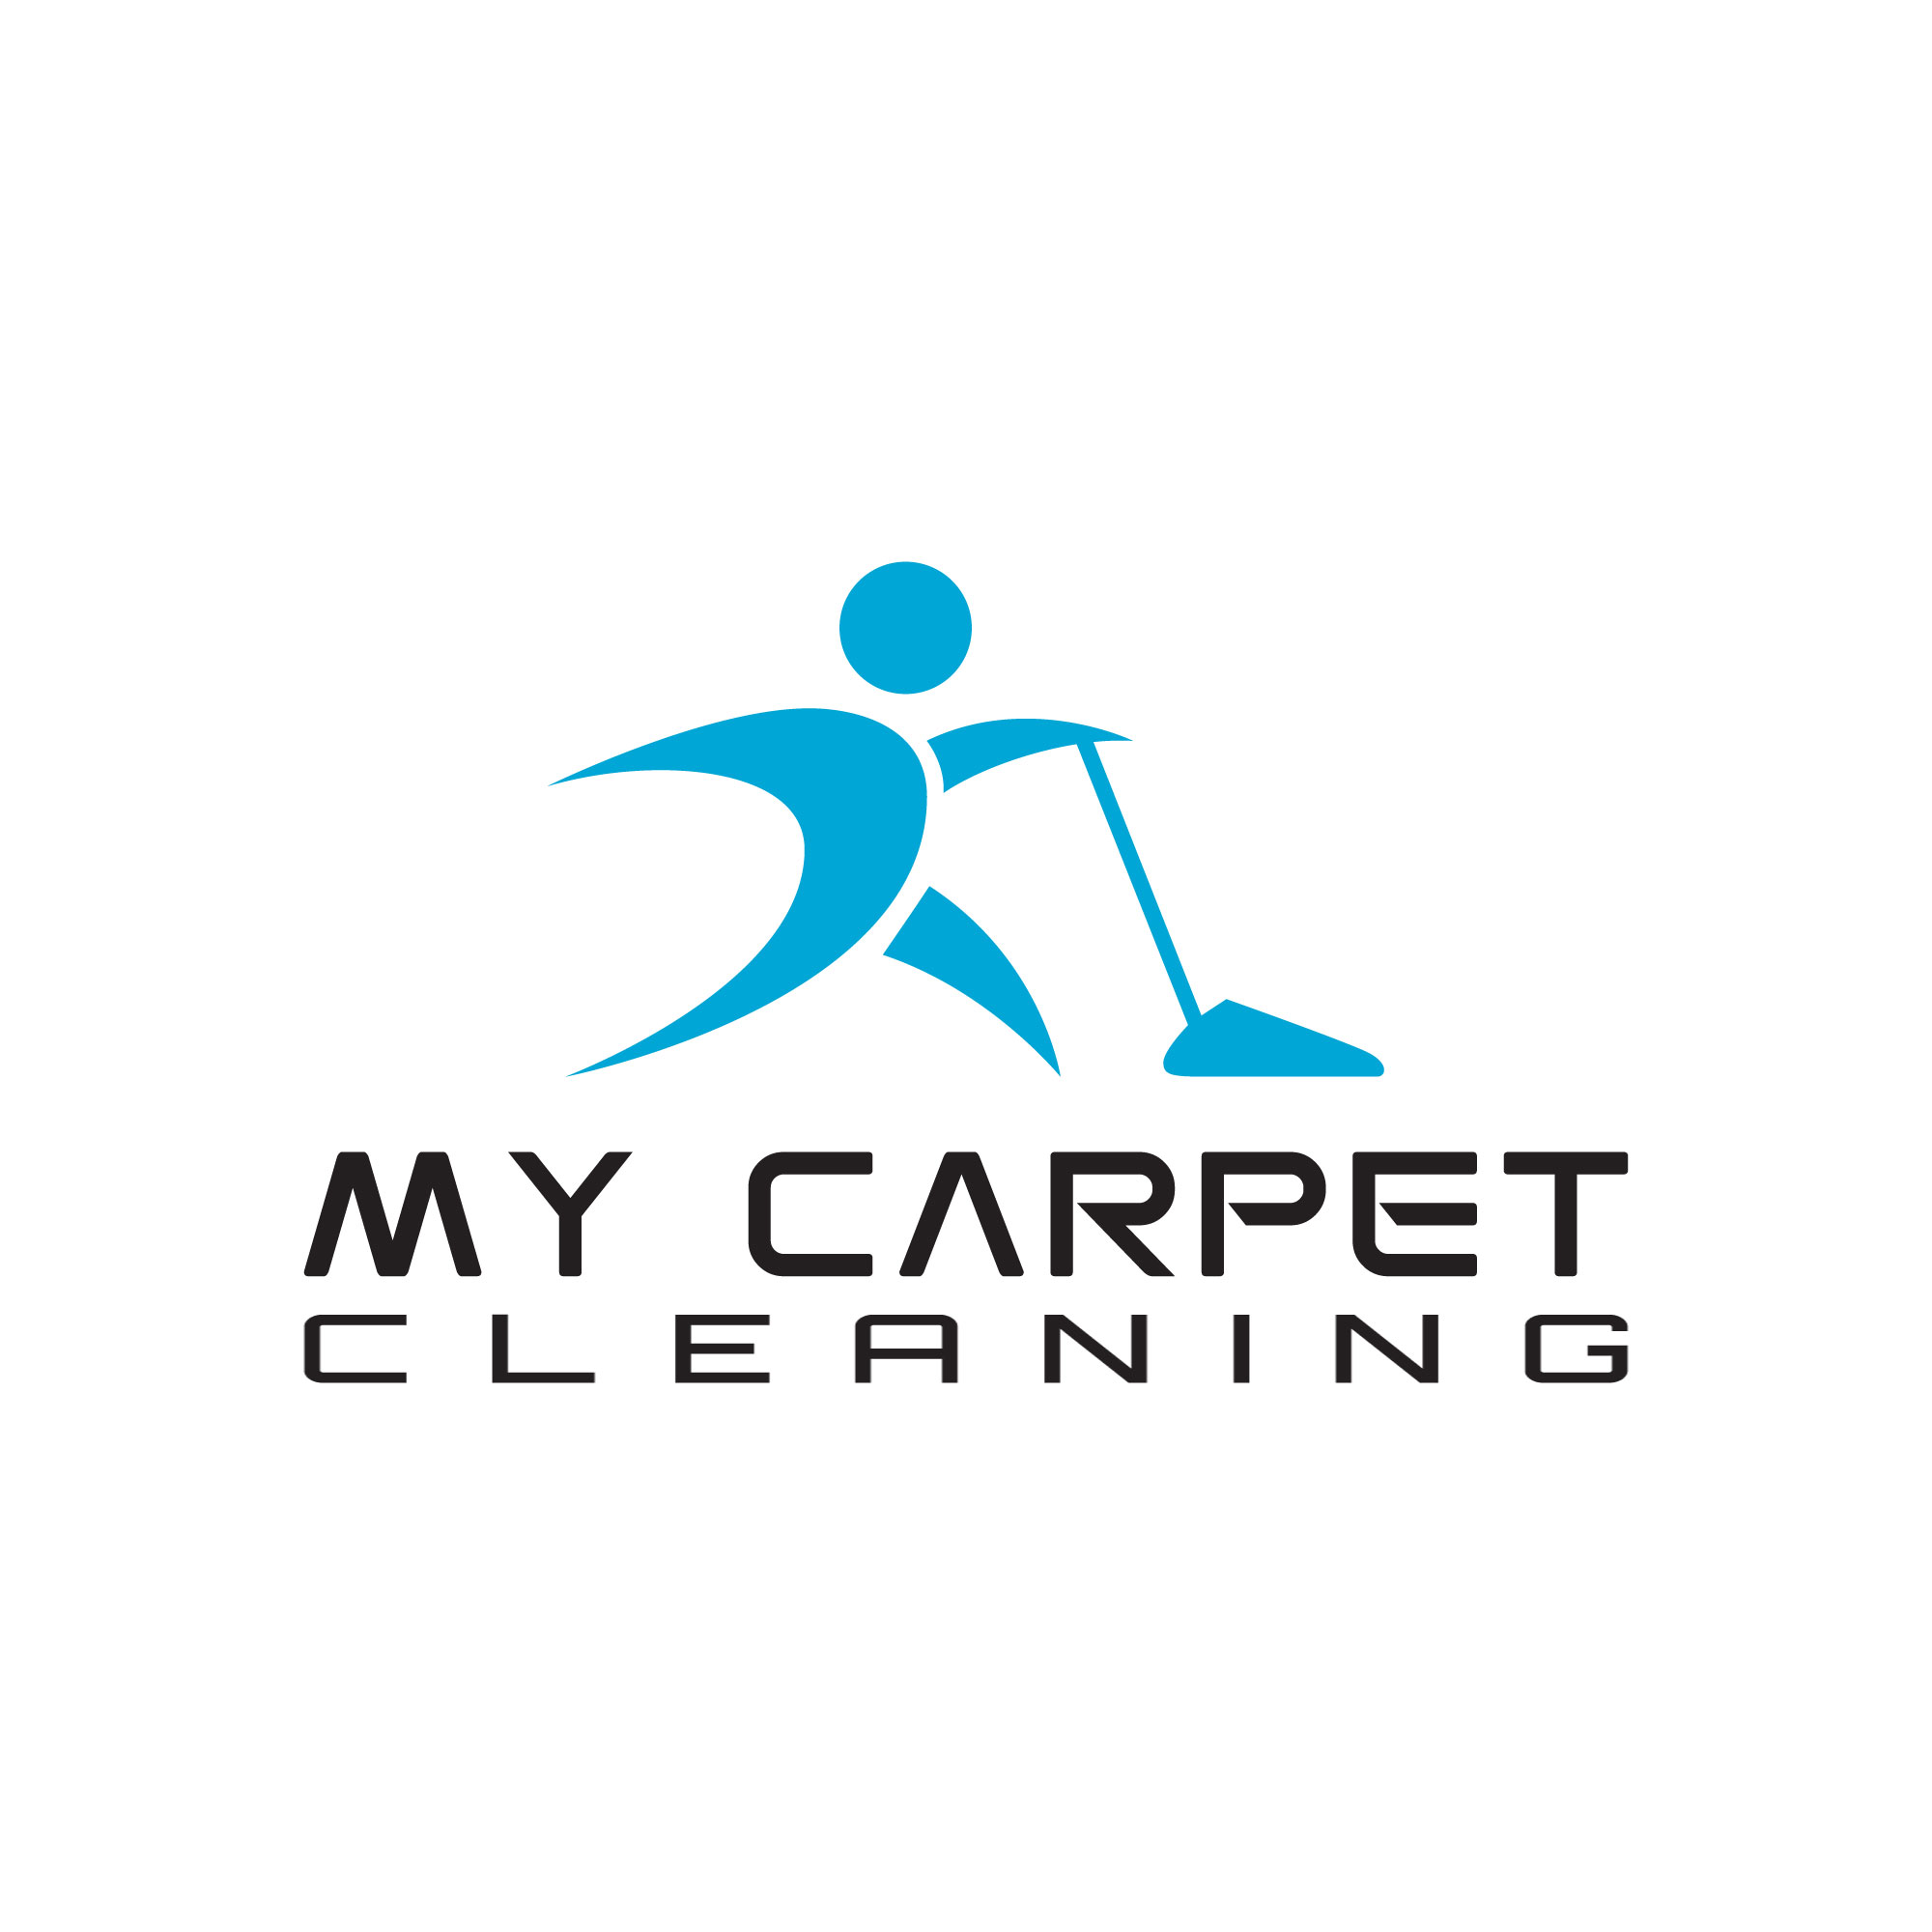 Carpet Cleaning Services in Barrington, IL